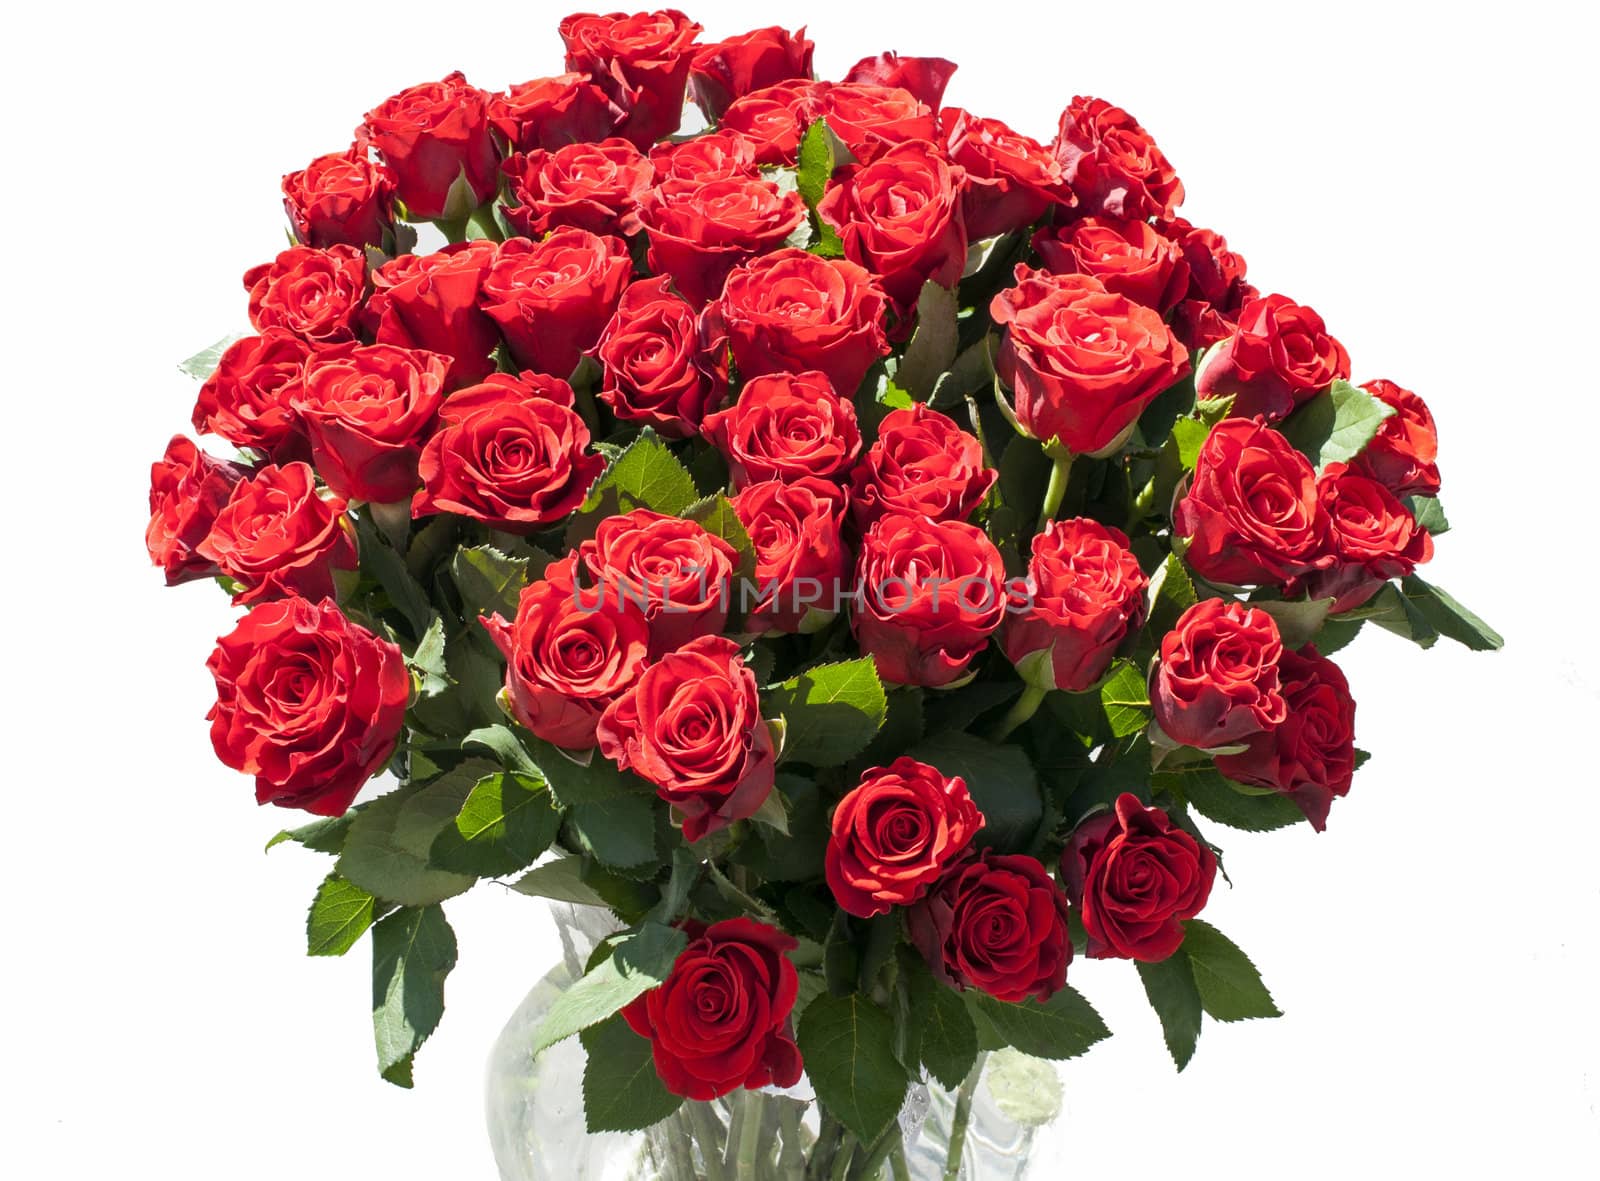 vase with red roses with sunlight on the flowers